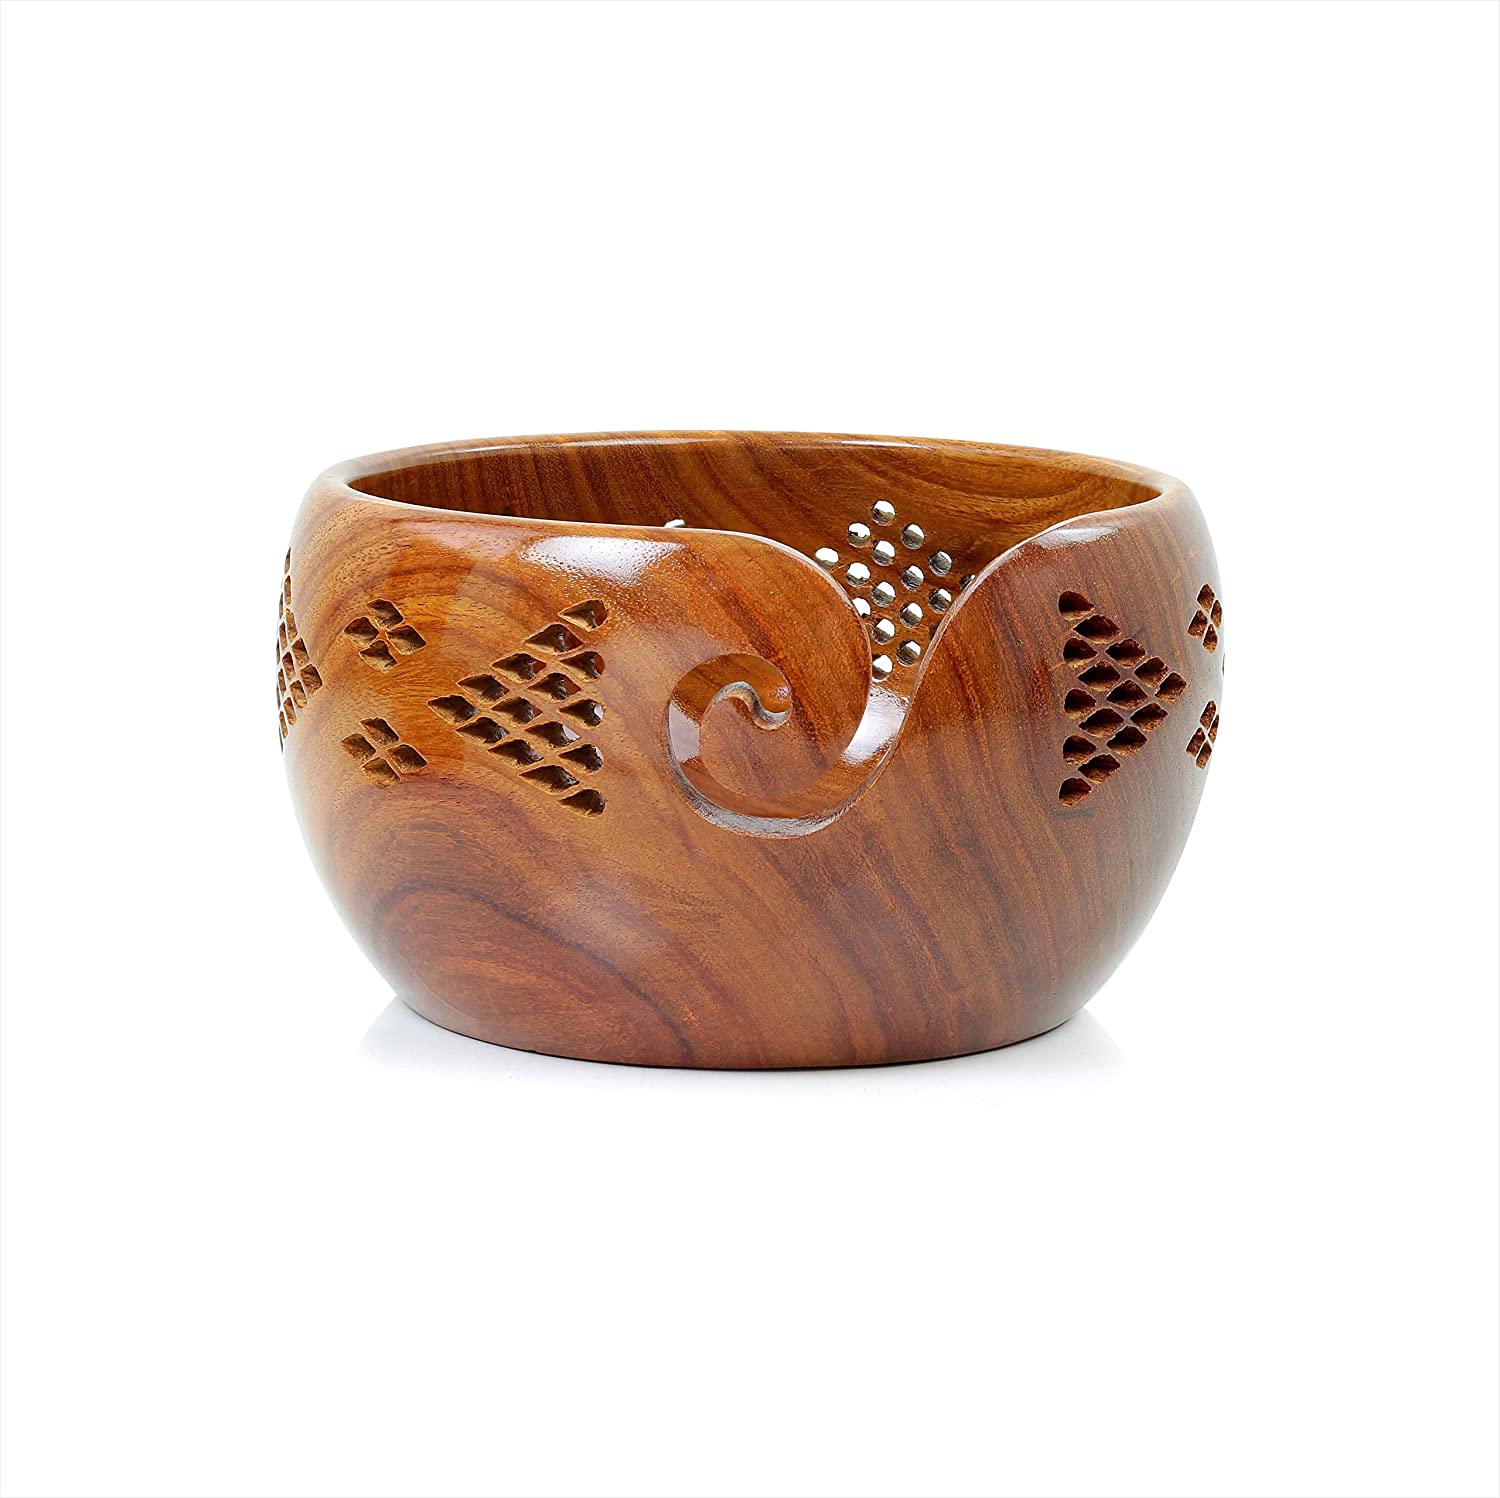 Premium Handcrafted Rosewood Yarn Bowls for Knitting, Crochet, Sewing &  Crafts - Large